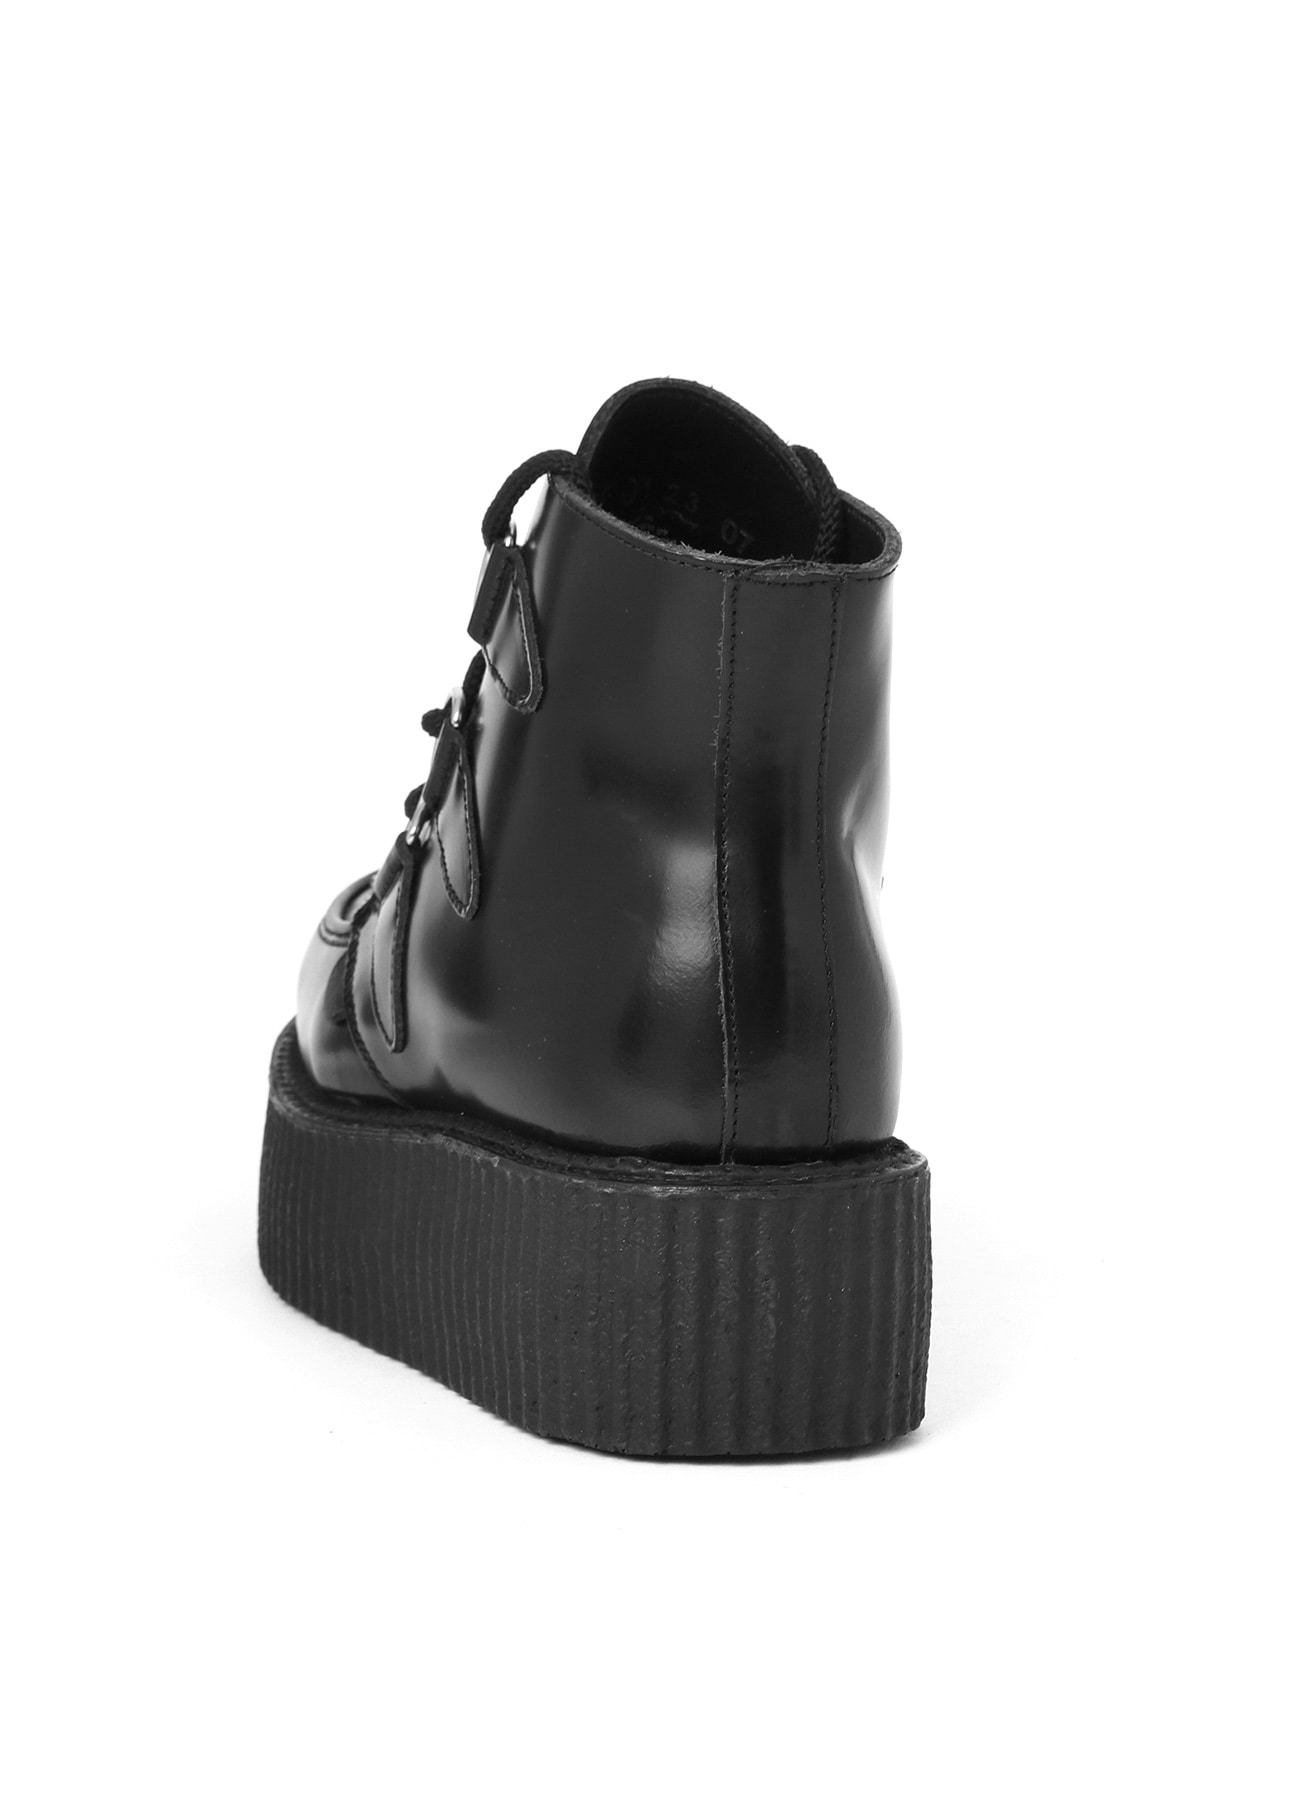 LIMI feu ×UNDERGROUND(R) BLACK LEATHER BOOTS WITH METAL PLATES(US 